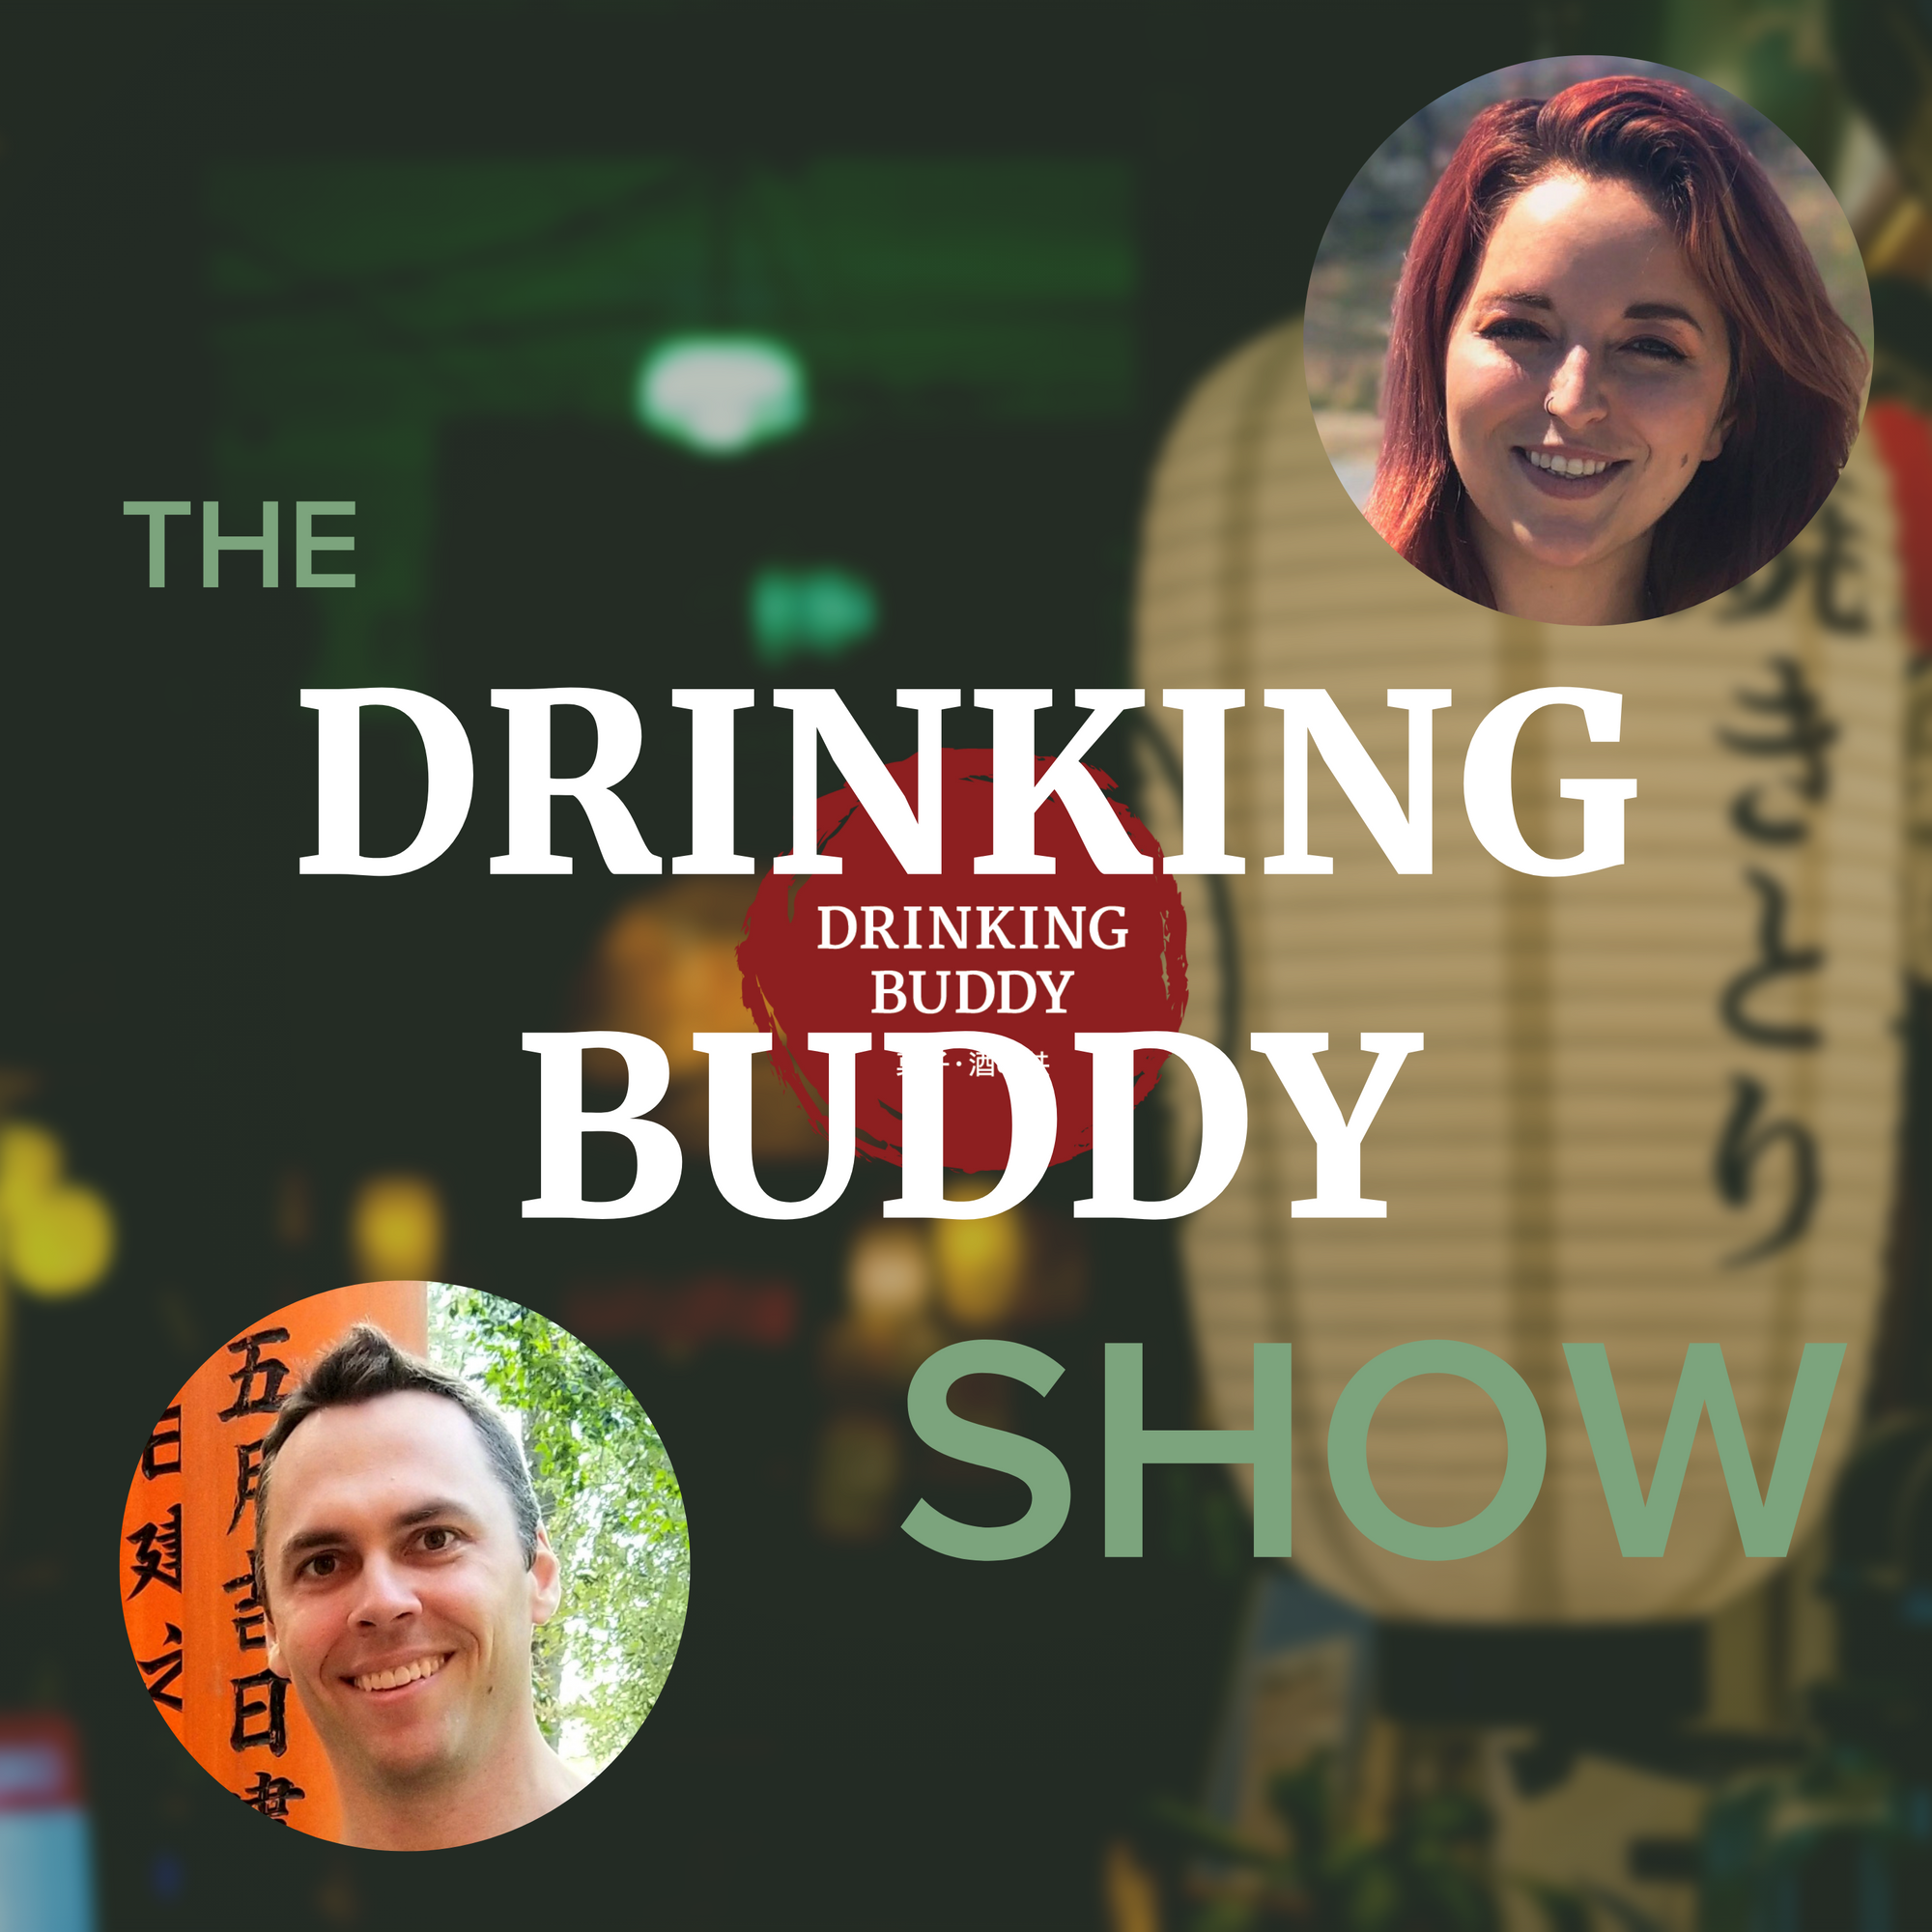 Frank Rodgers and guest Cassidy Liston in episode 6 of The Drinking Buddy Show